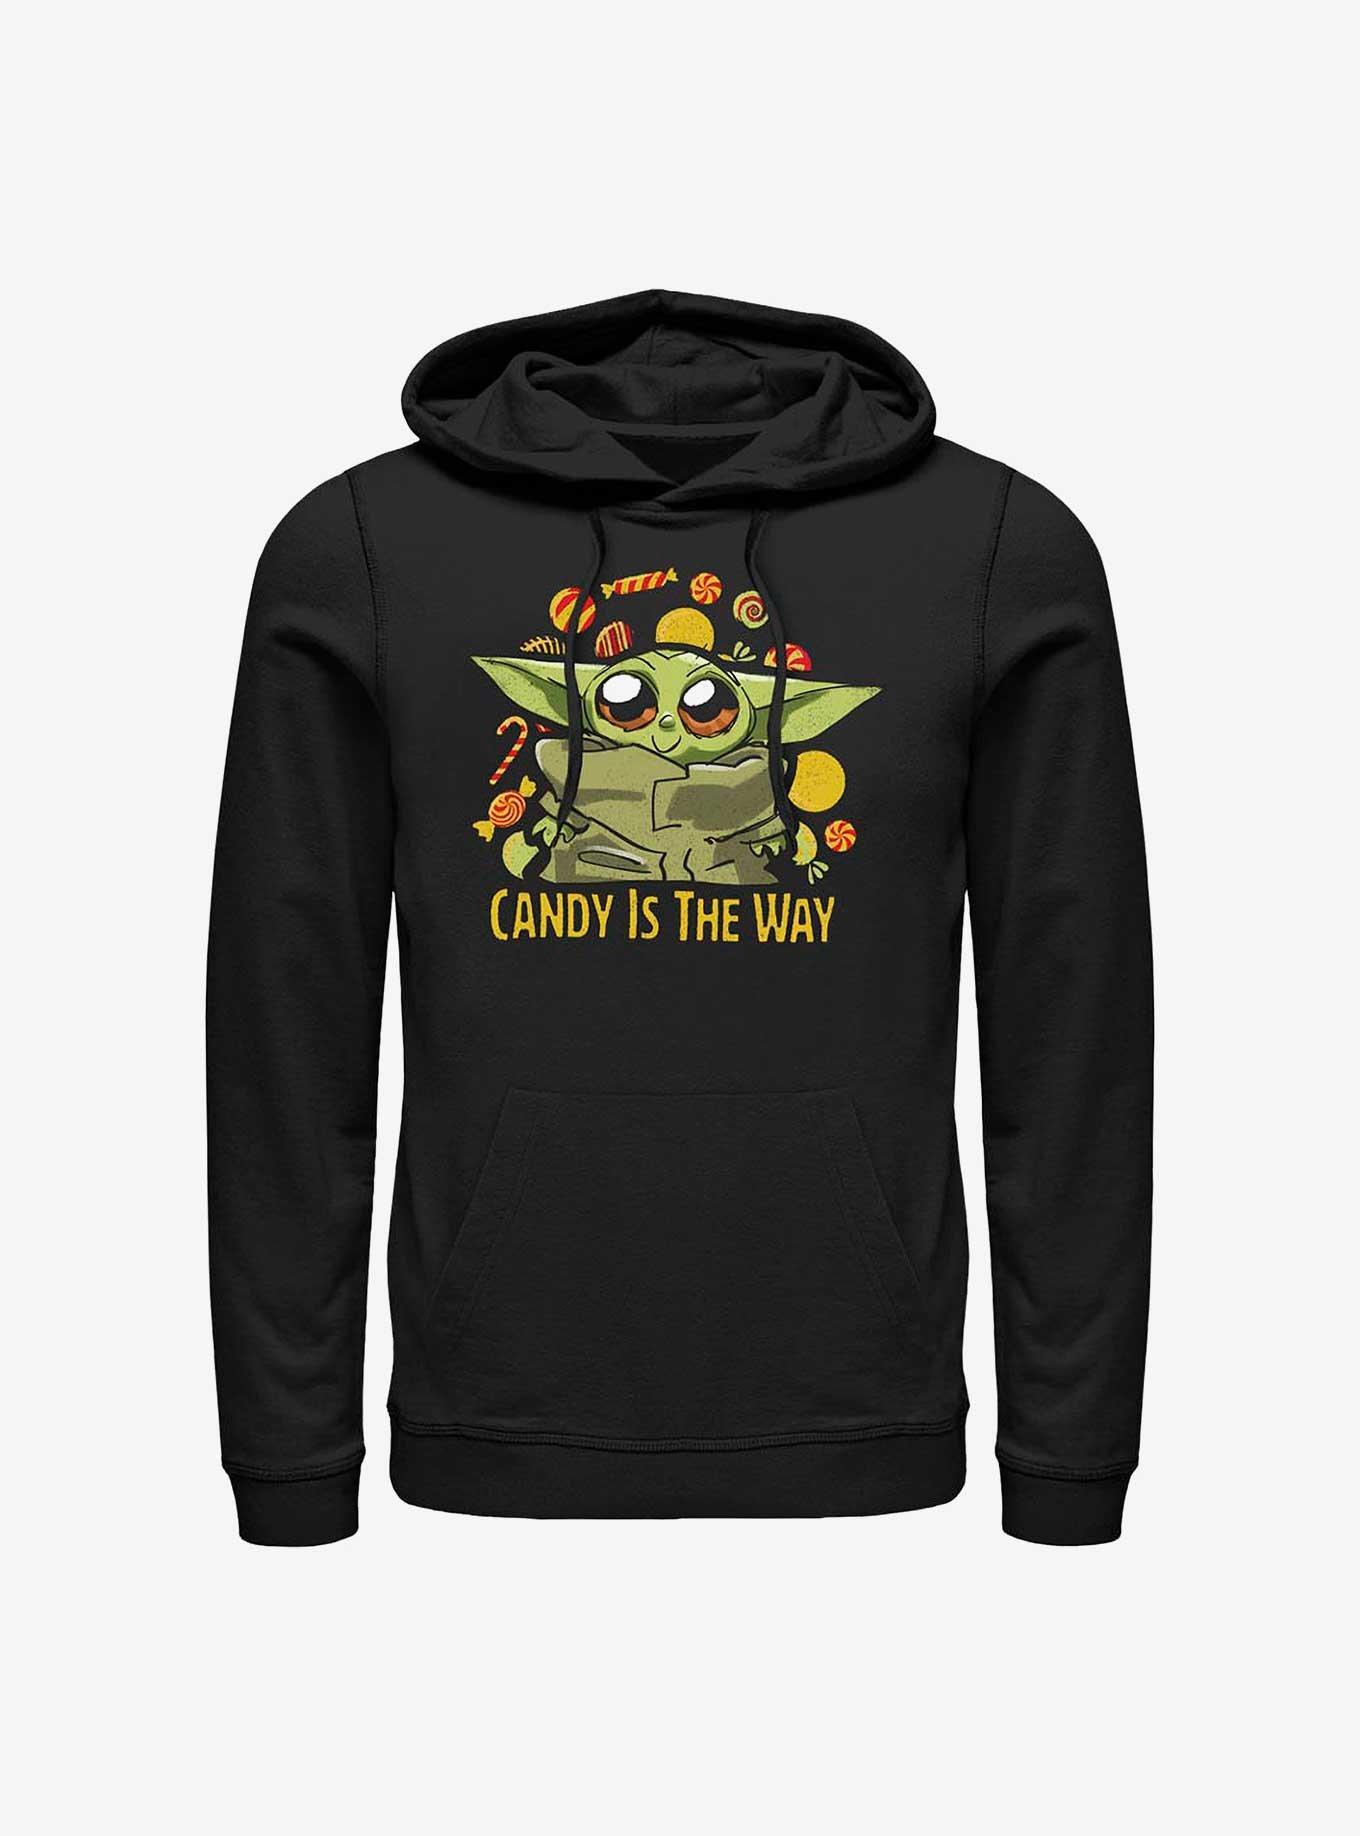 Star Wars The Mandalorian Child Candy Is Way Hoodie